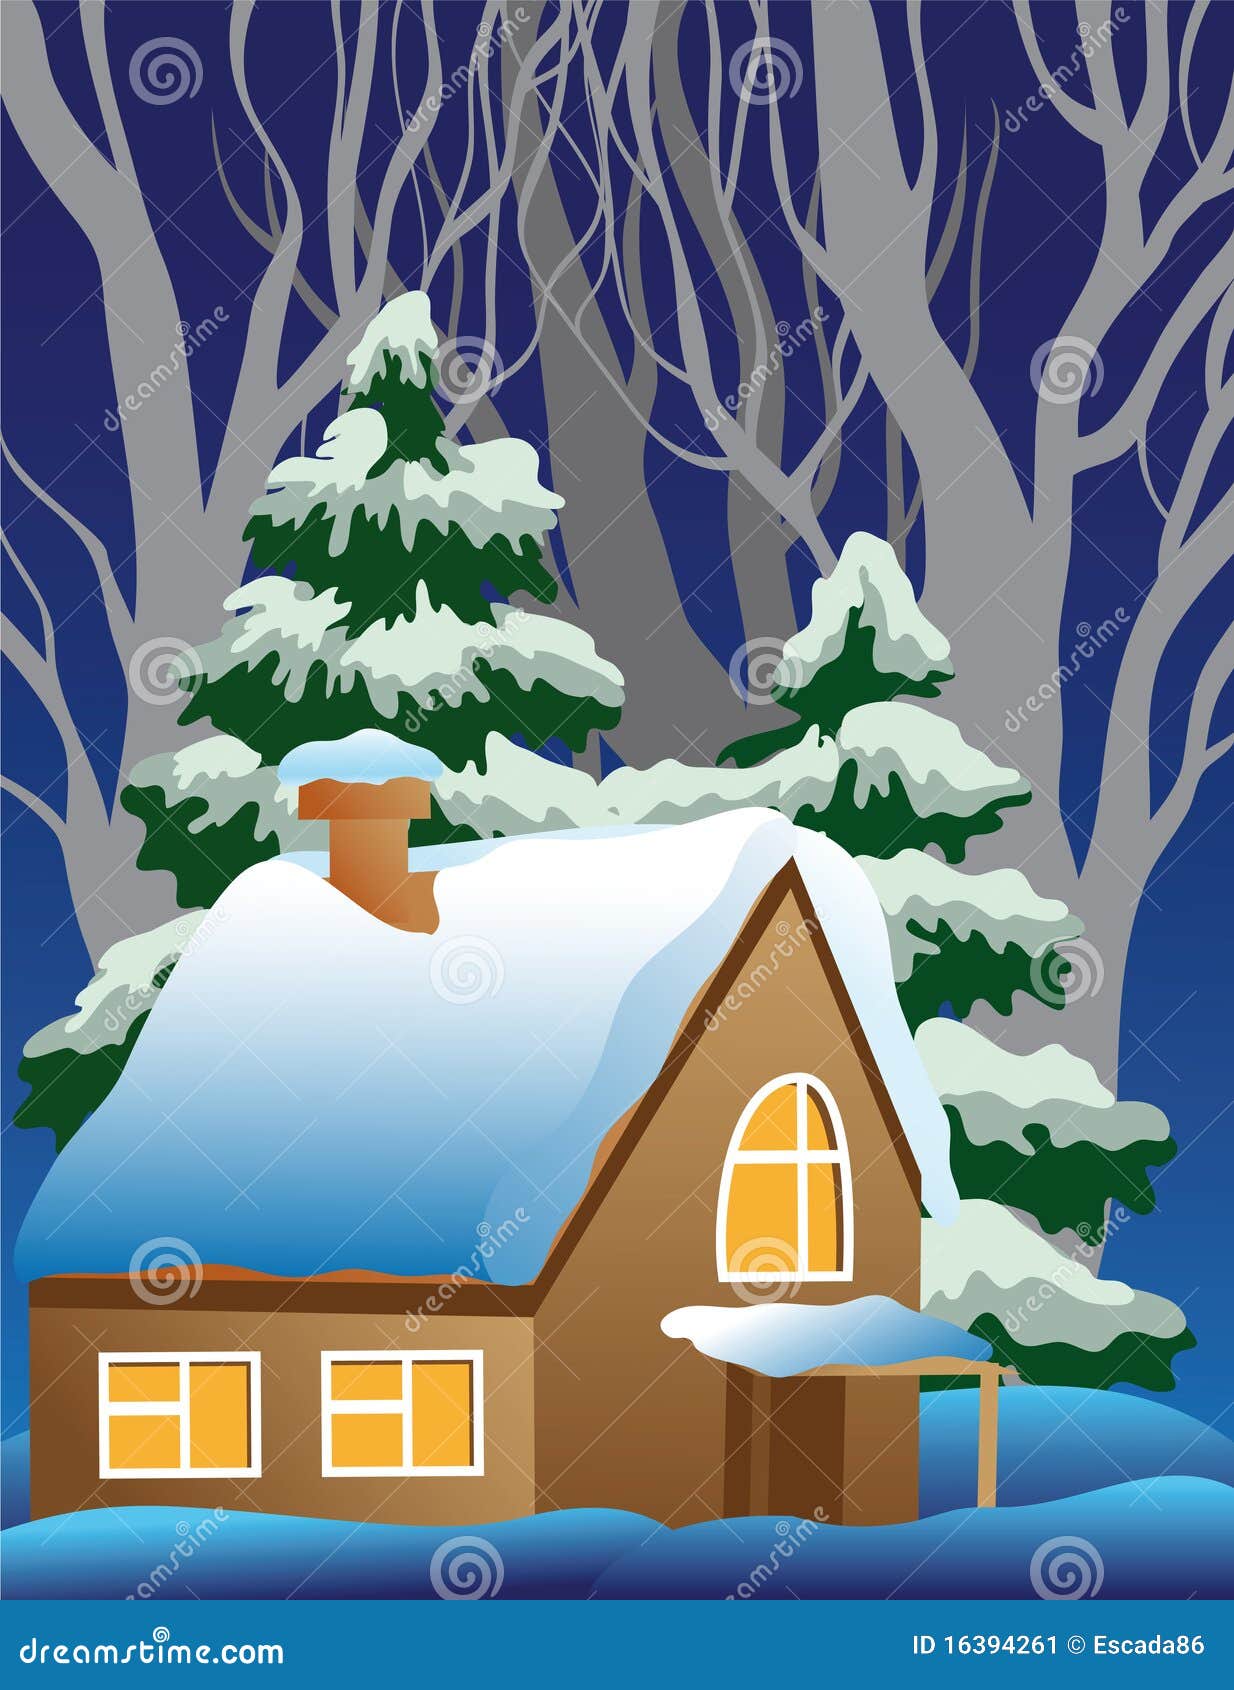 house with snow clipart - photo #37